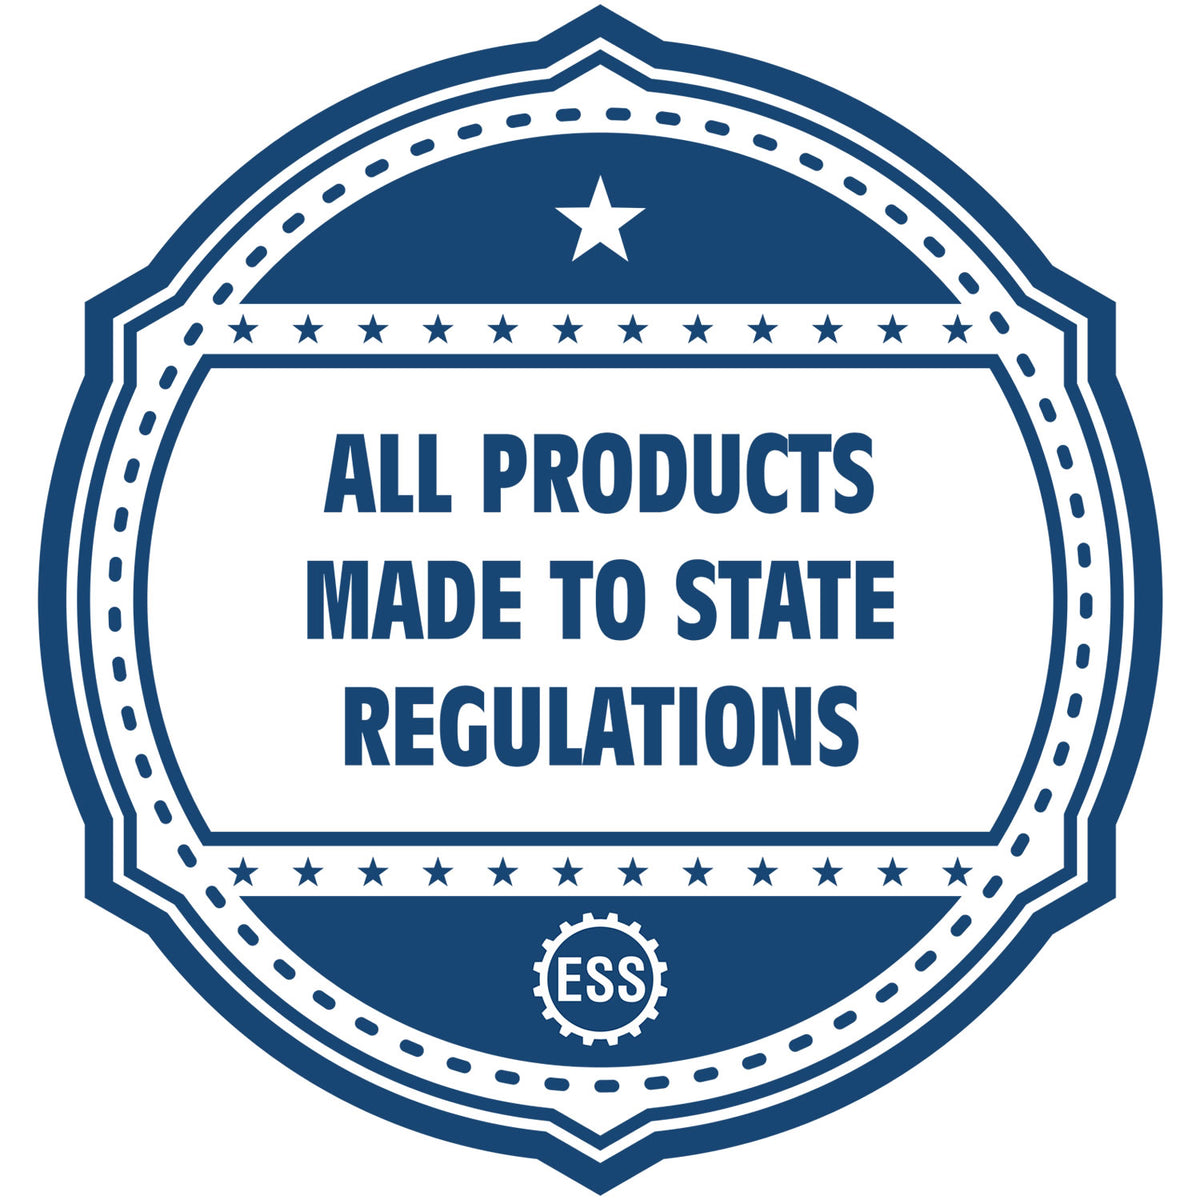 An icon or badge element for the New Mexico Engineer Desk Seal showing that this product is made in compliance with state regulations.